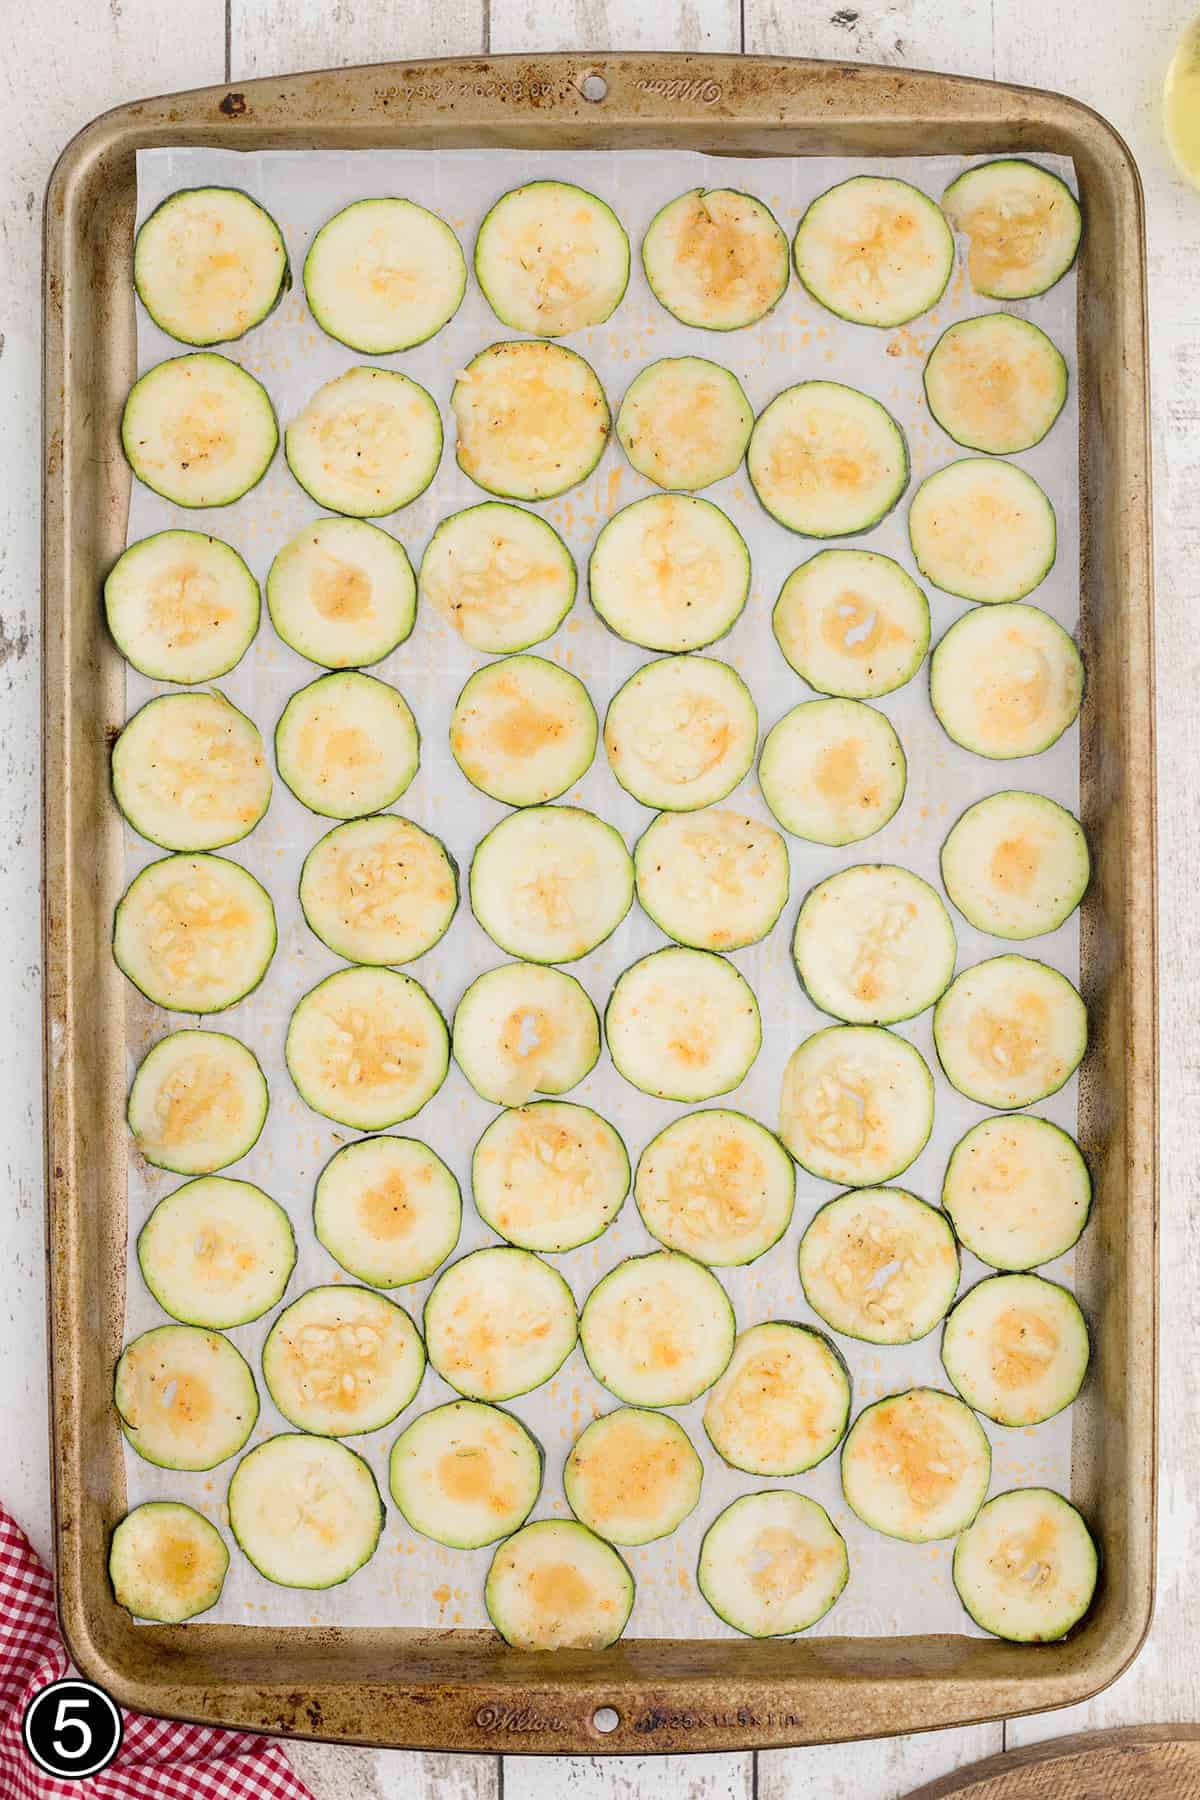 Zucchini chips on a lined baking sheet.